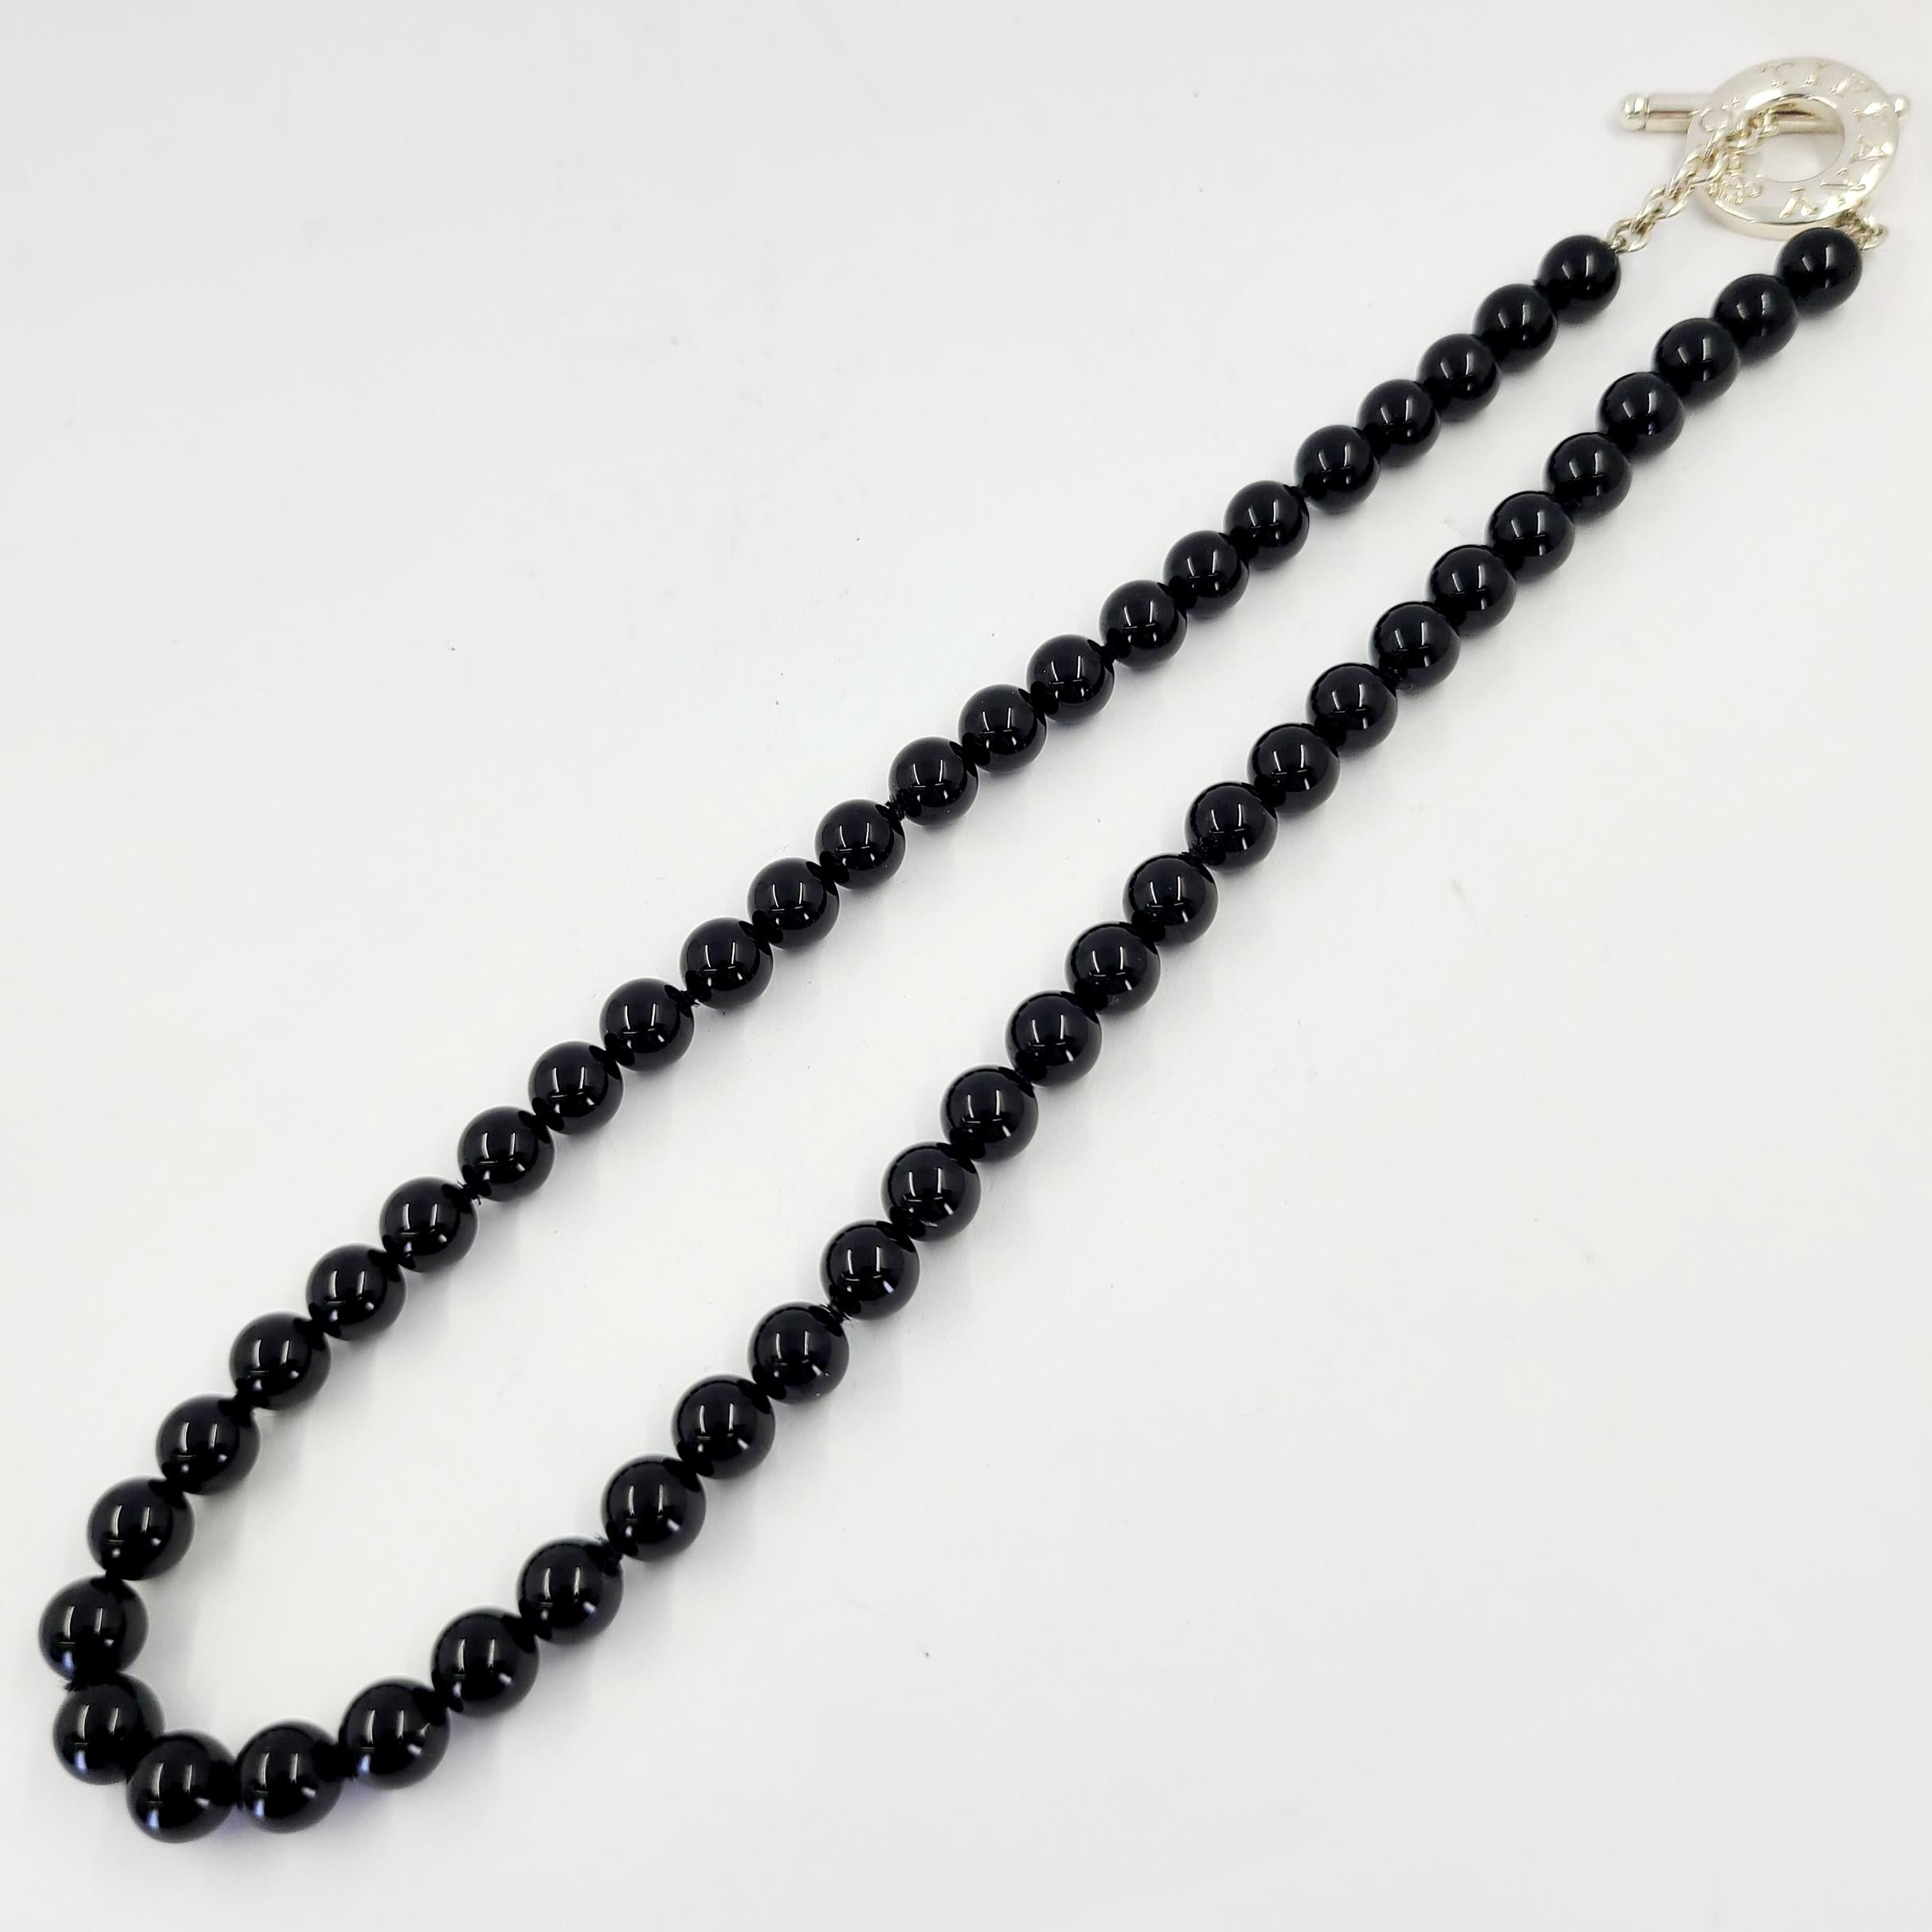 Tiffany and Co Sterling Silver Necklace Featuring 8mm Onyx Beads and Toggle Clasp. 17.5 Inch Length. $575 MSRP.